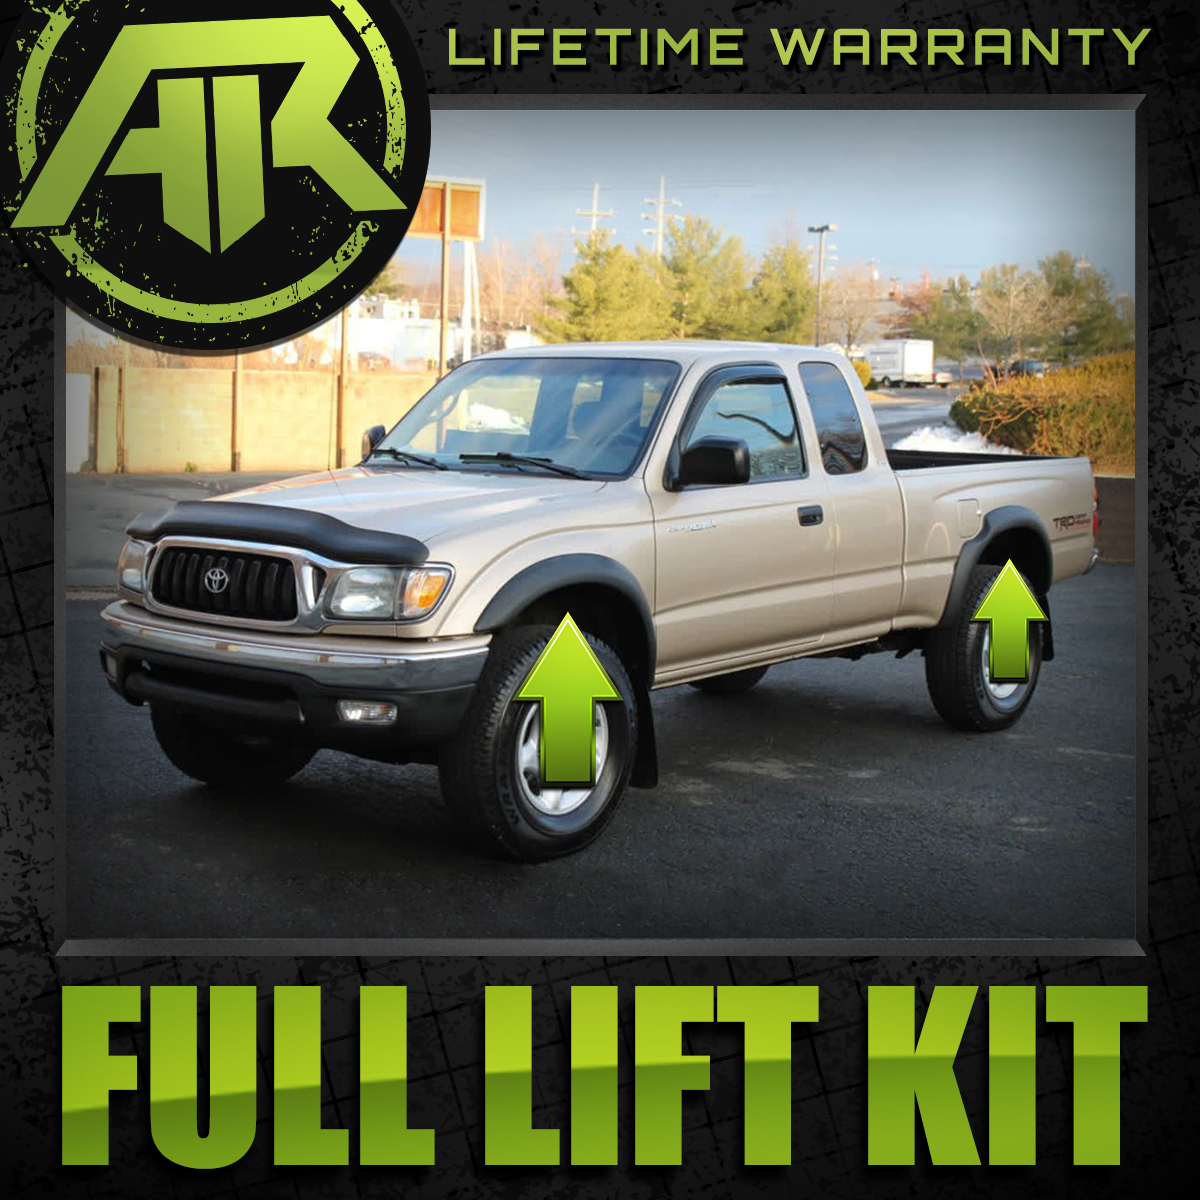 3/" Fr 2/" Rr FULL LIFT LEVELING KIT FOR 1996-2004 Toyota Tacoma 2WD 4WD